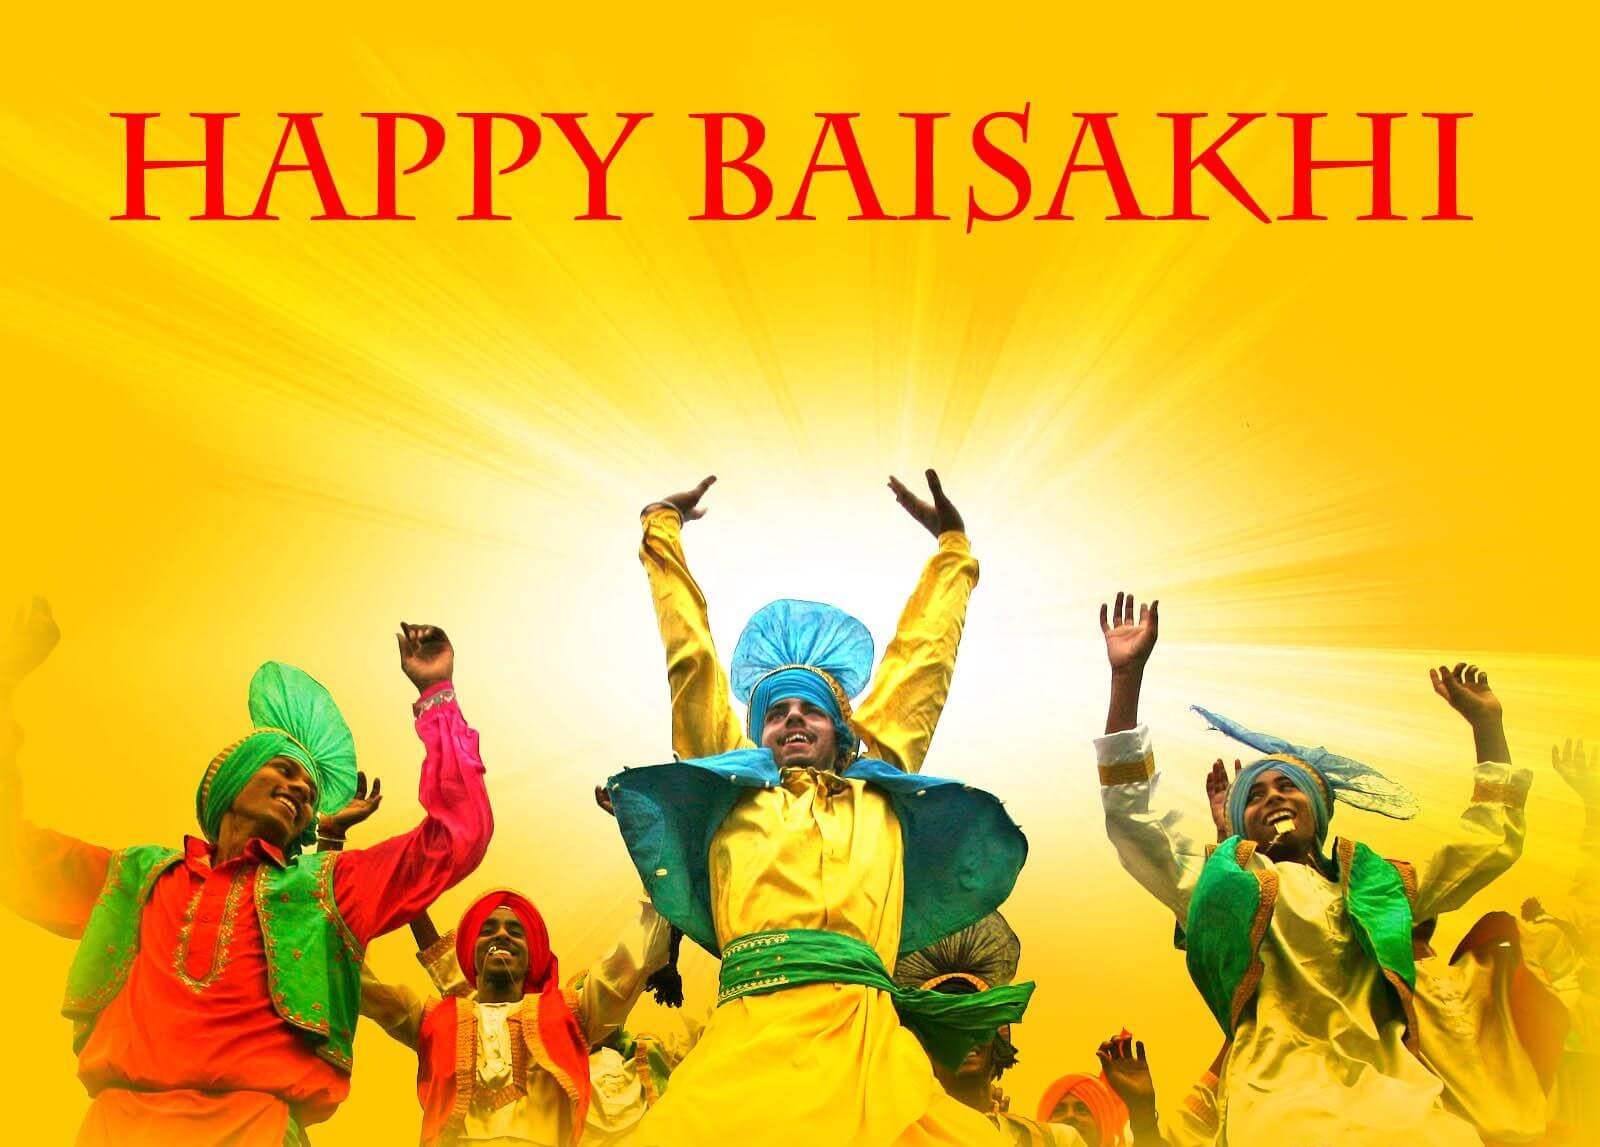 Happy Baisakhi 2019 -Wishes, Image, Wallpaper, Messages